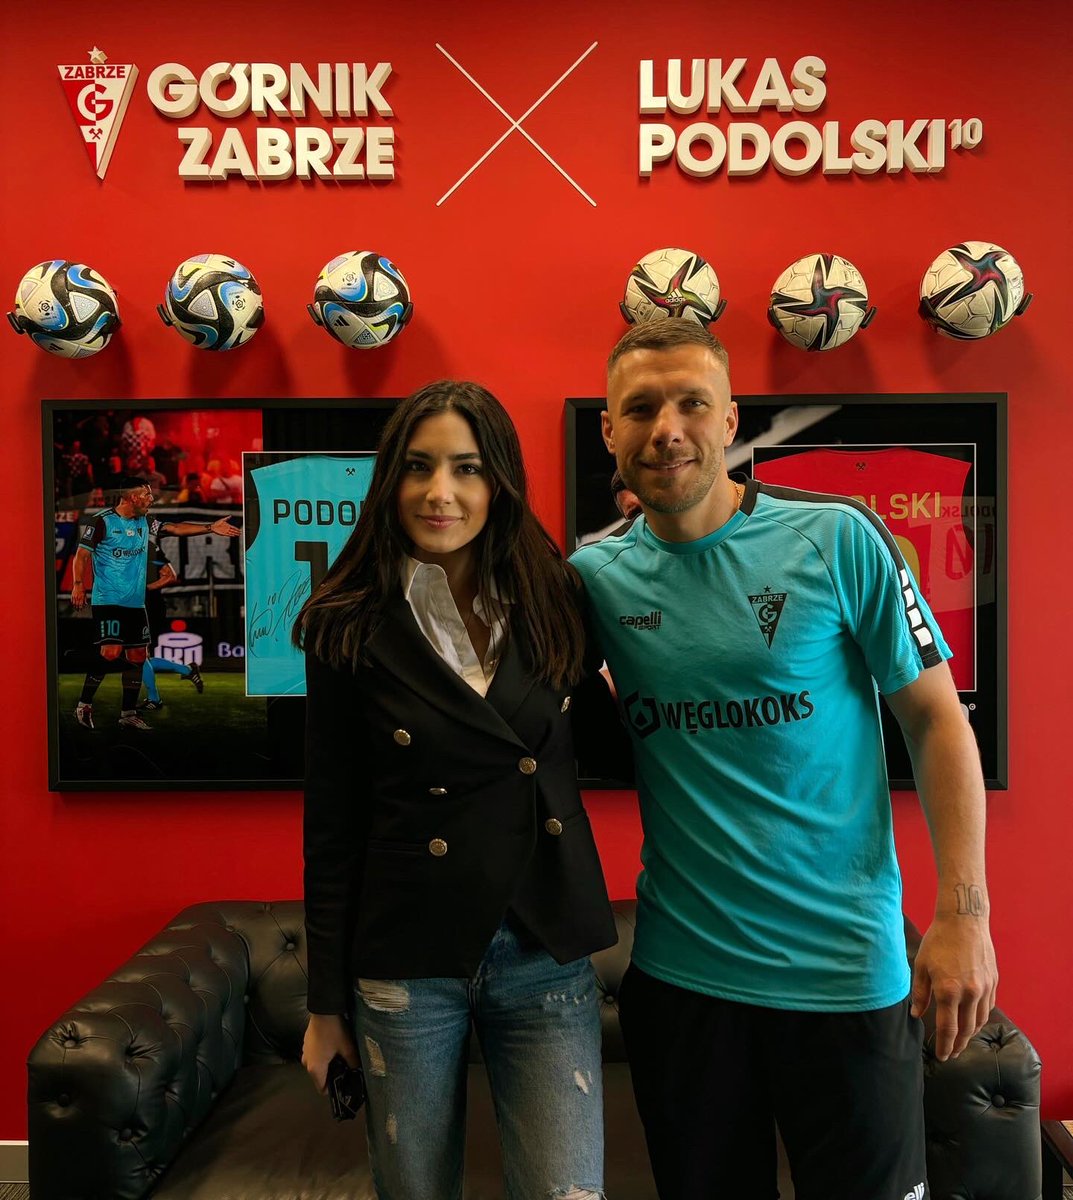 🙌🙏📸 thank you so much dearest Lukas Podolski for a great welcome. Such incredible team and a stadium… waiting you to Türkiye soon! 🎥 #Euro24 interviews #30daystoEuro24